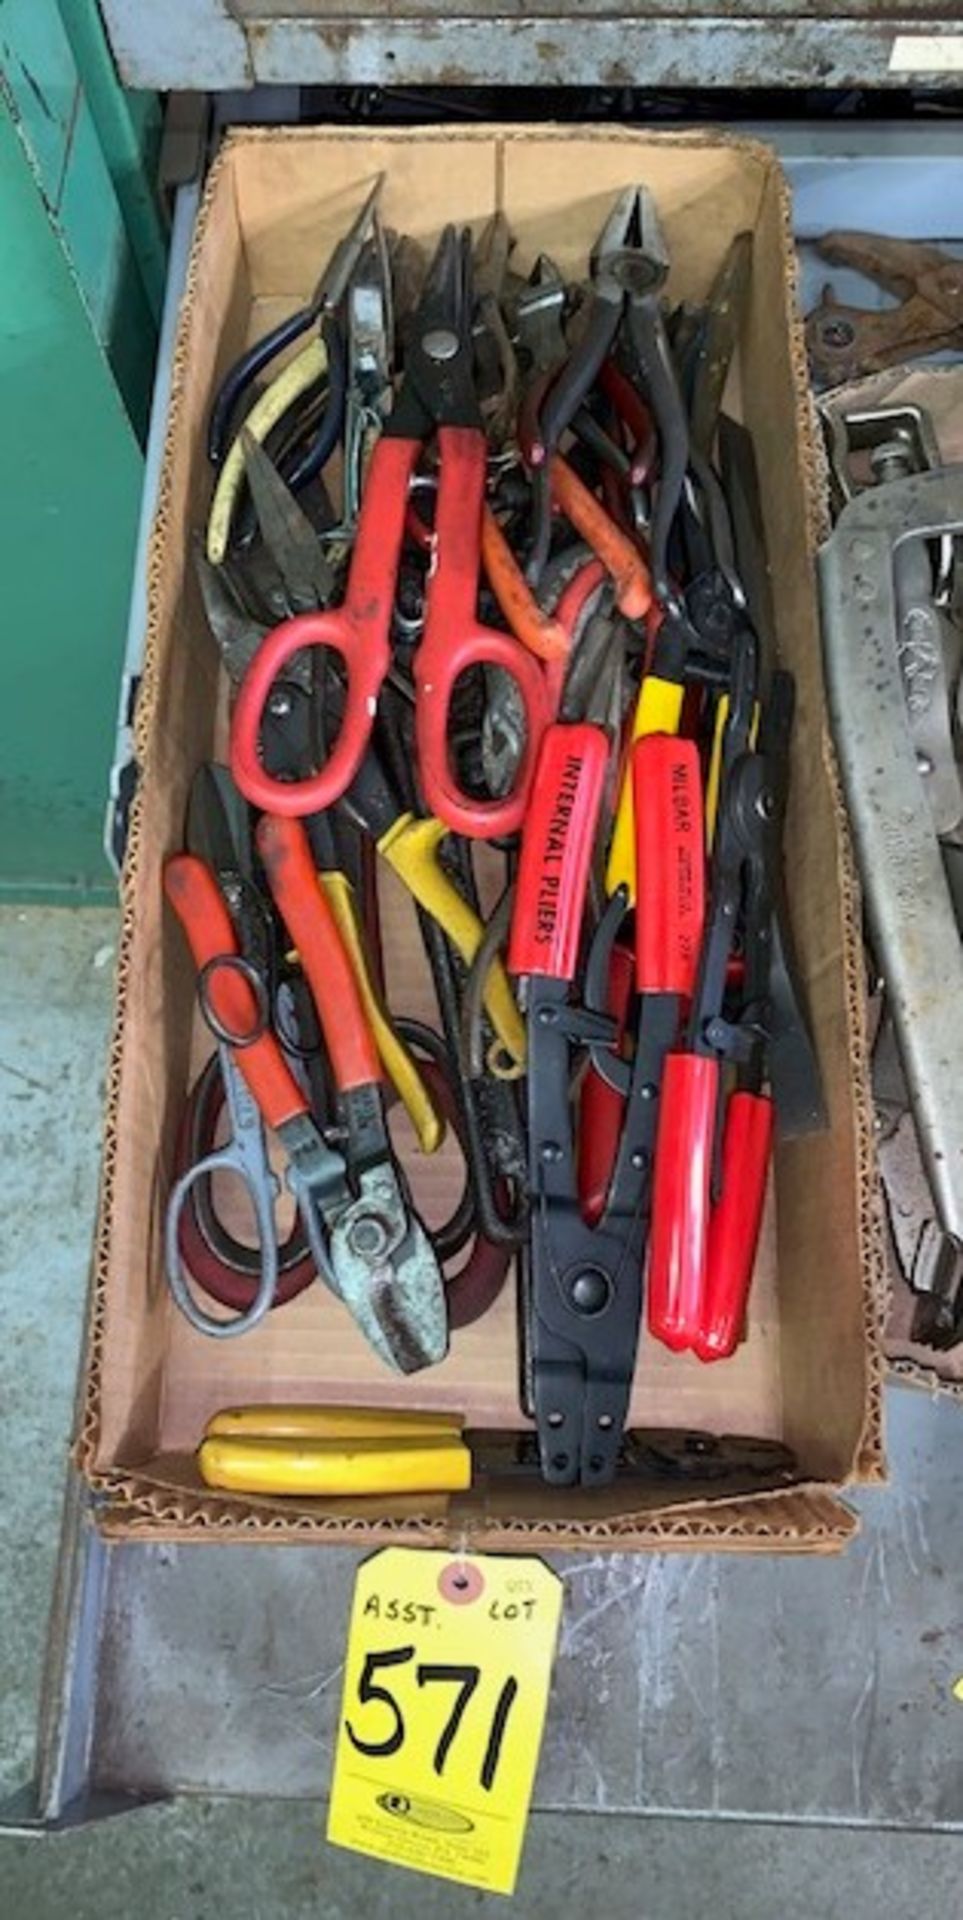 ASSORTED WIRE SNIPS, PLIERS AND CRIMPERS (3RD SHELF OF LOT 554 - RIGHT SIDE)